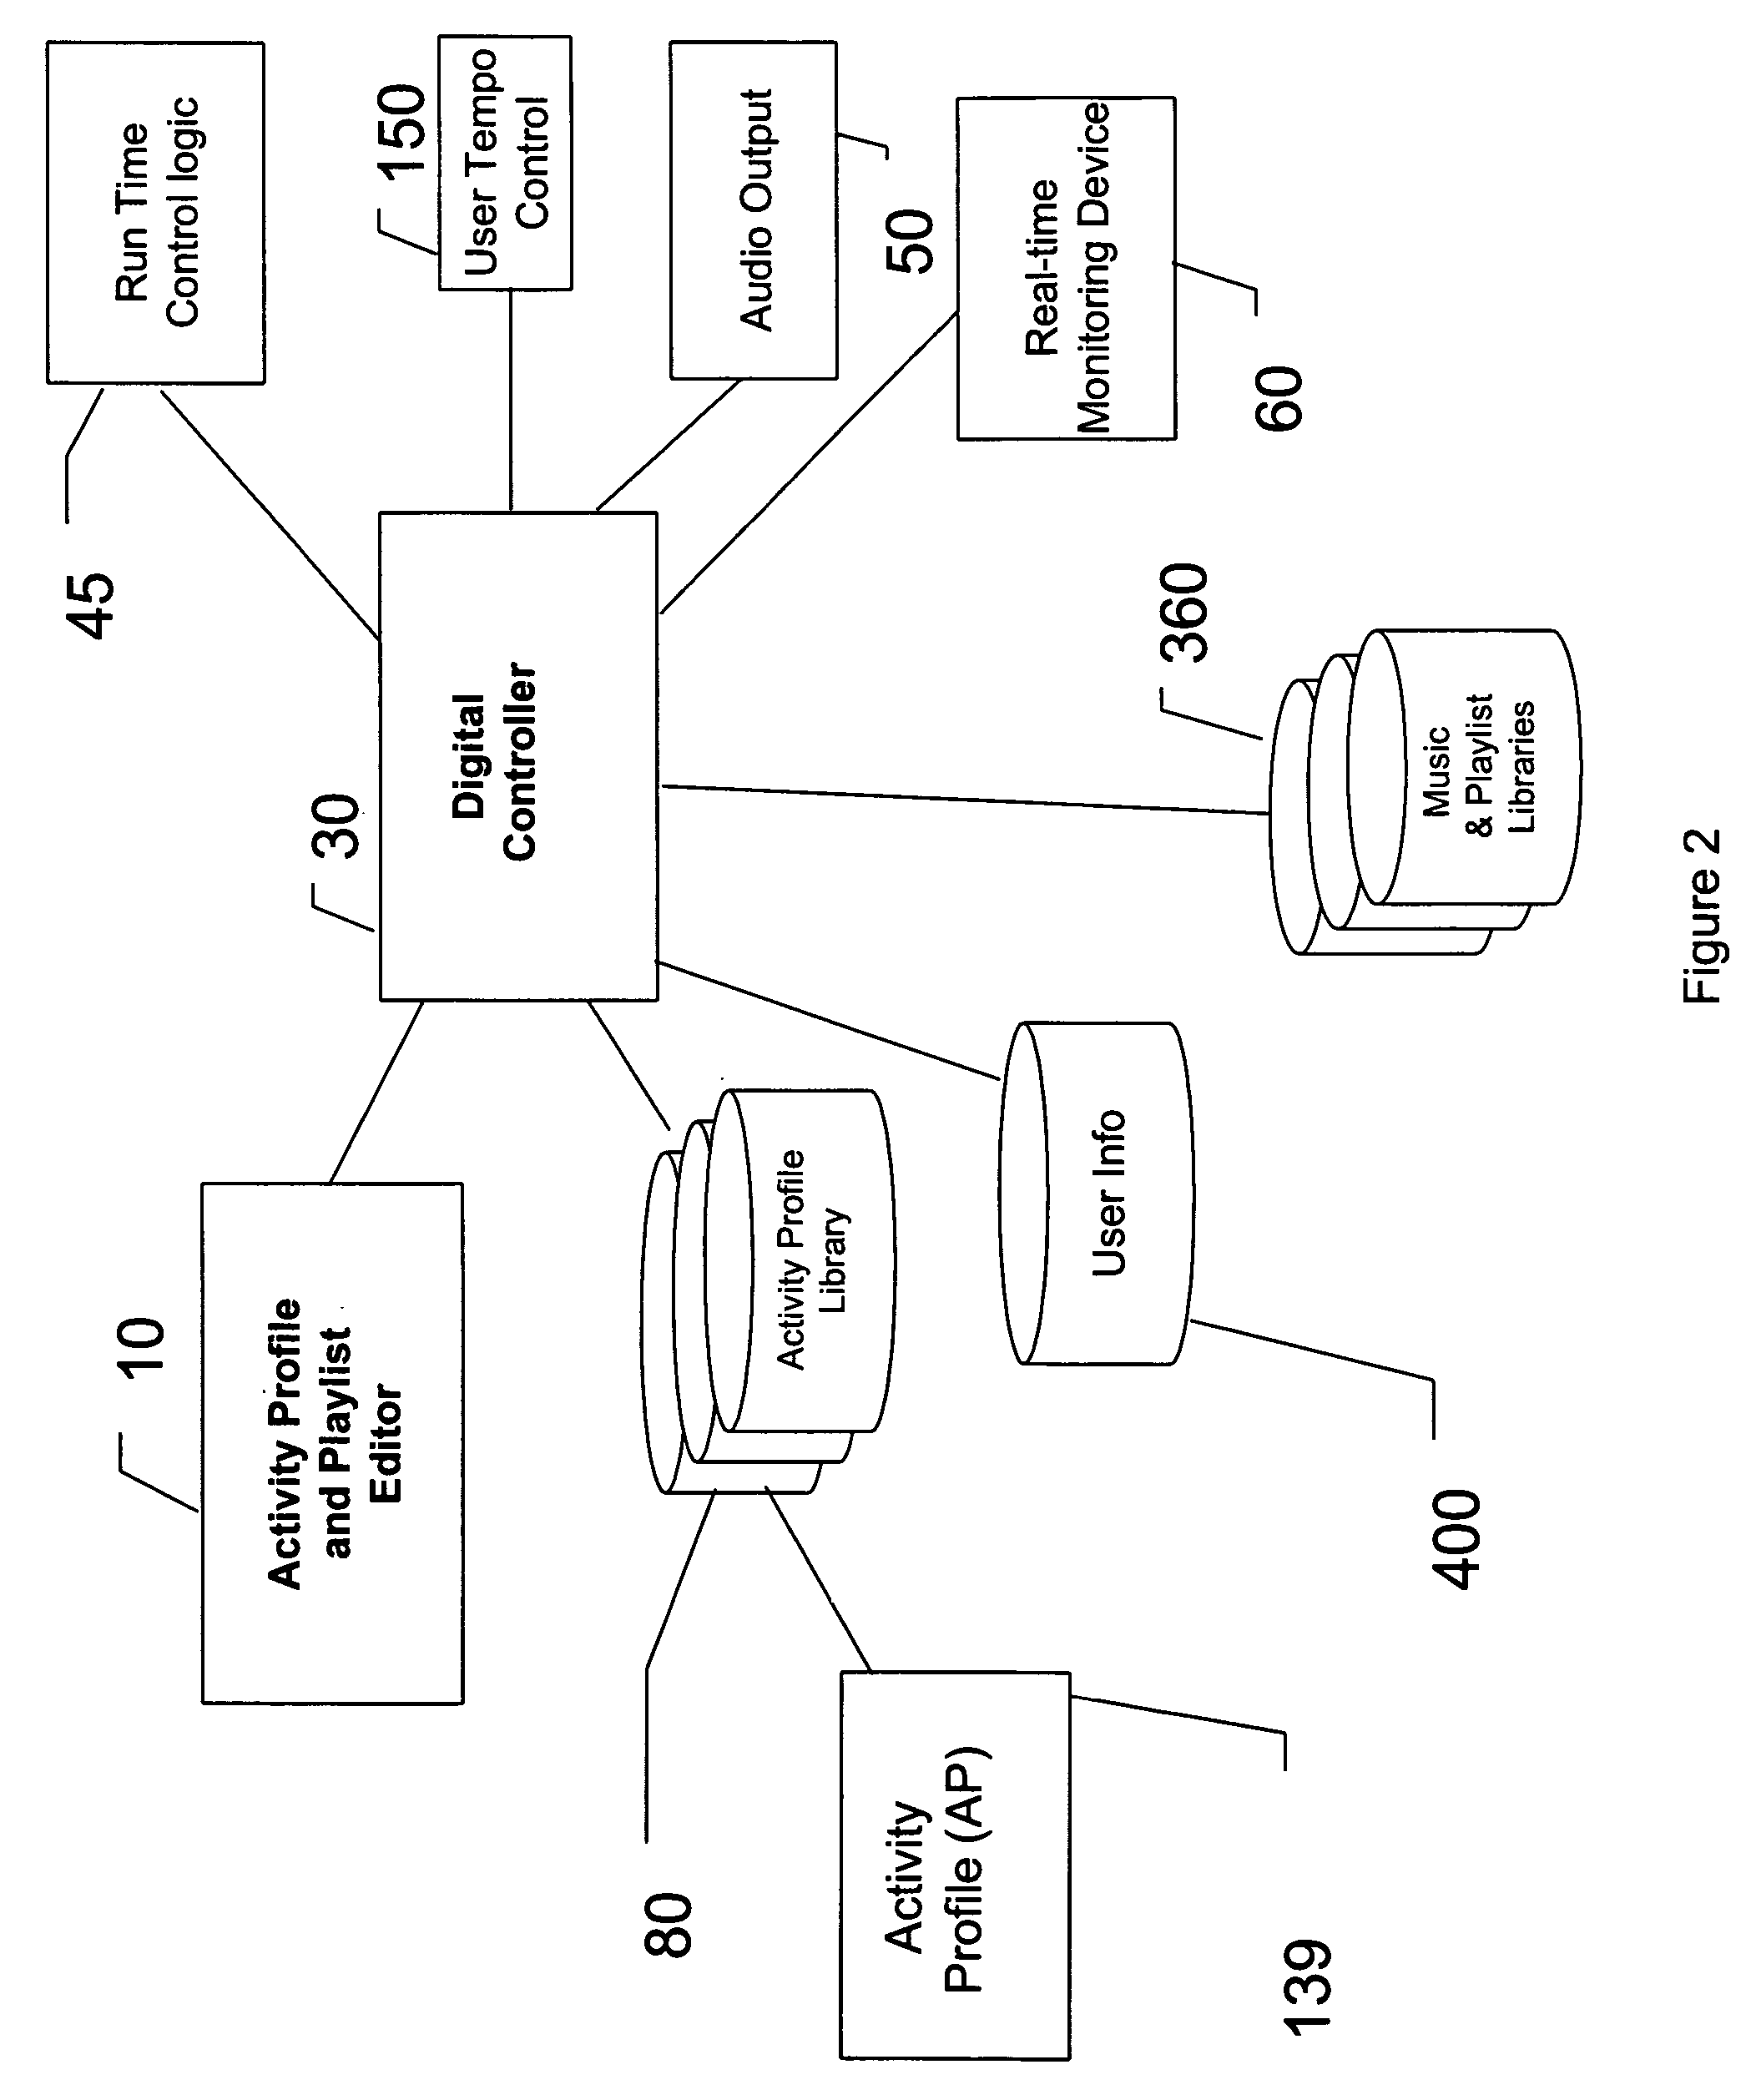 System and method for selecting music to guide a user through an activity